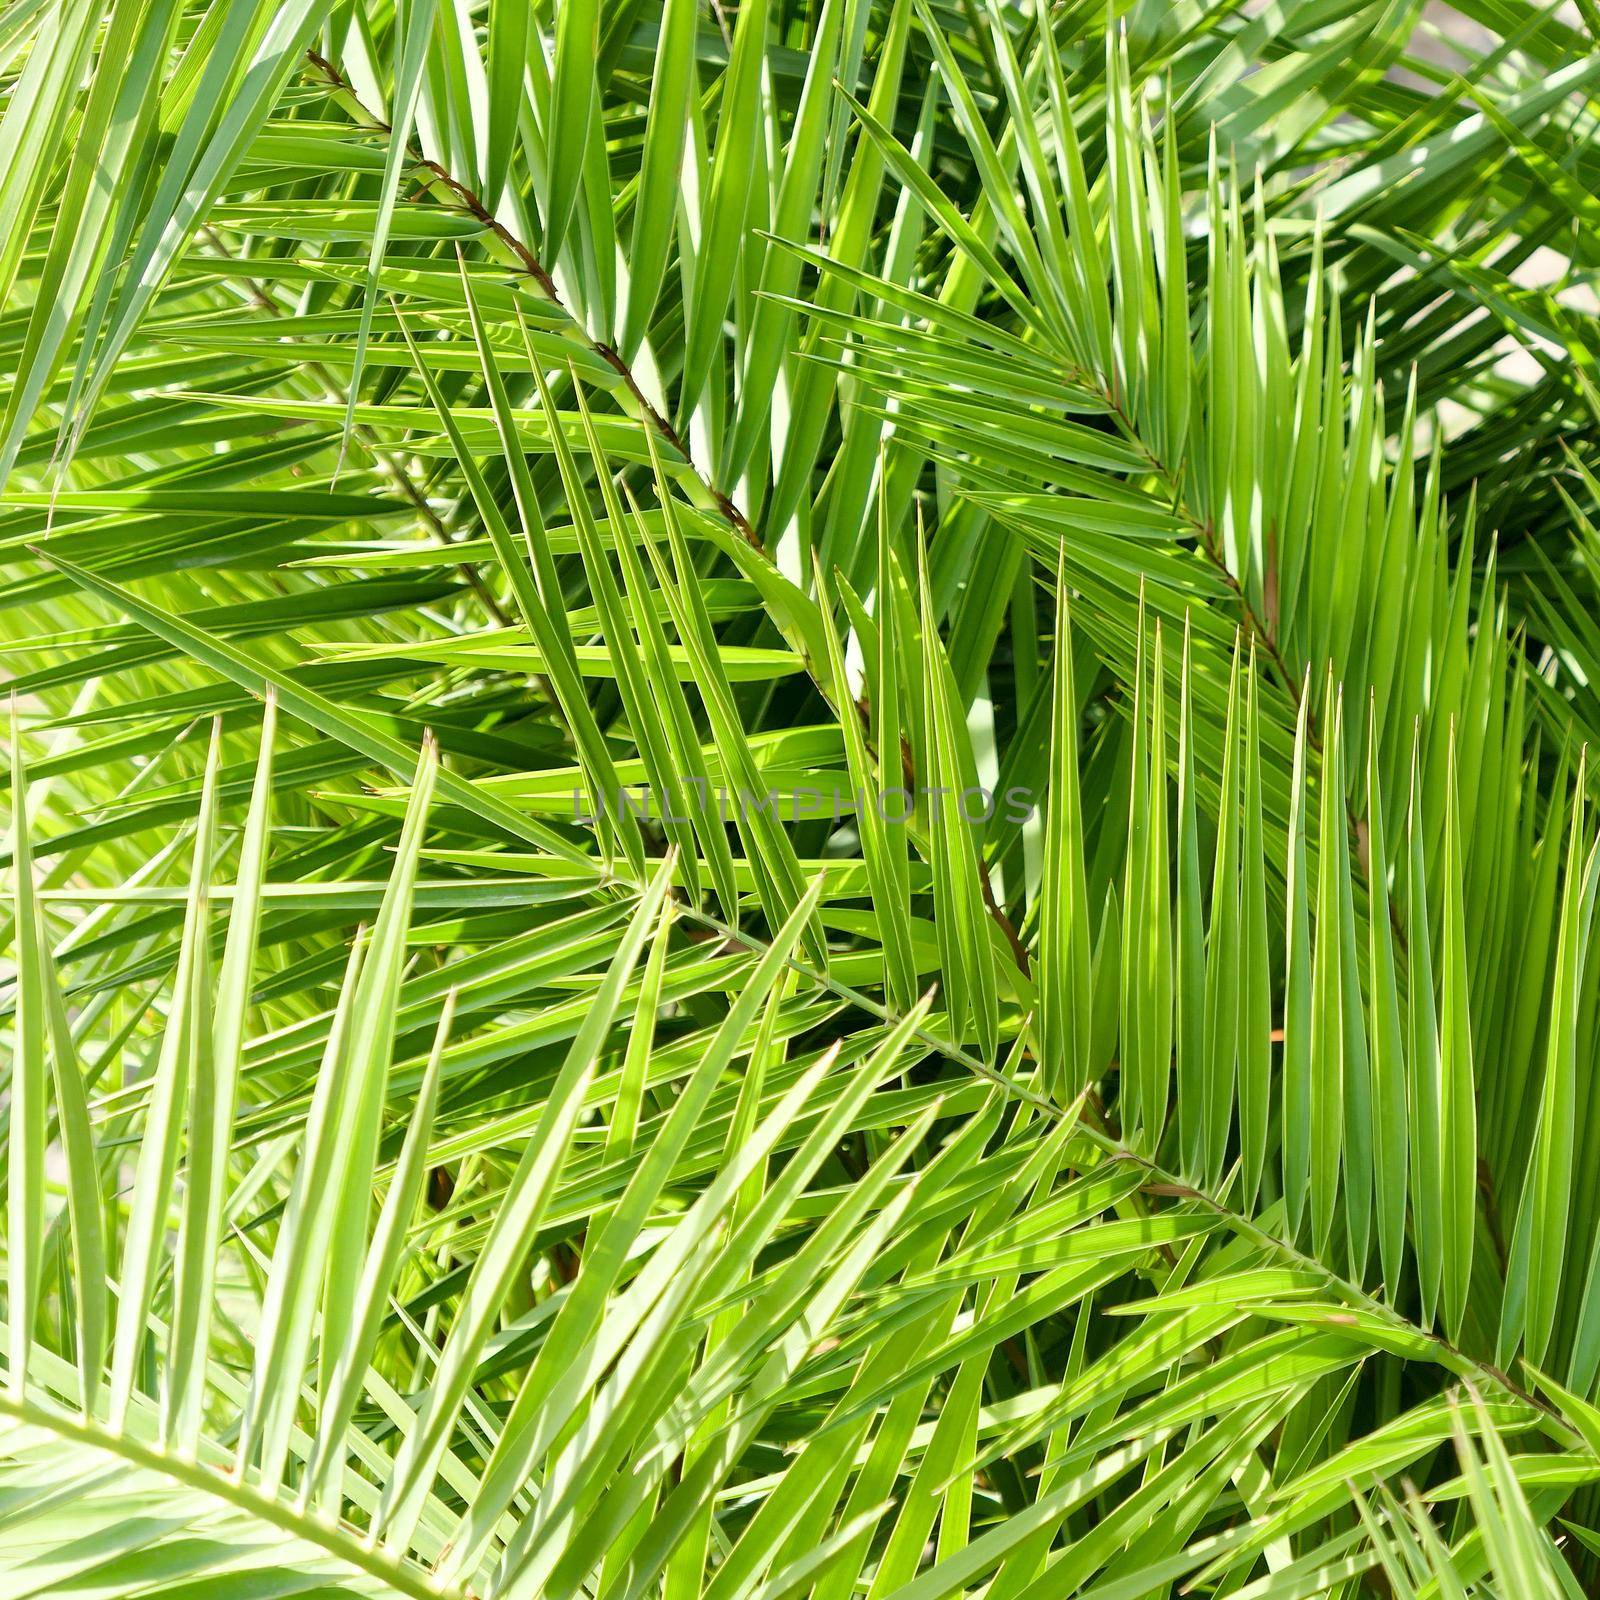 Exotic vacation, botanical background and summer travel concept - Palm leaves in summertime